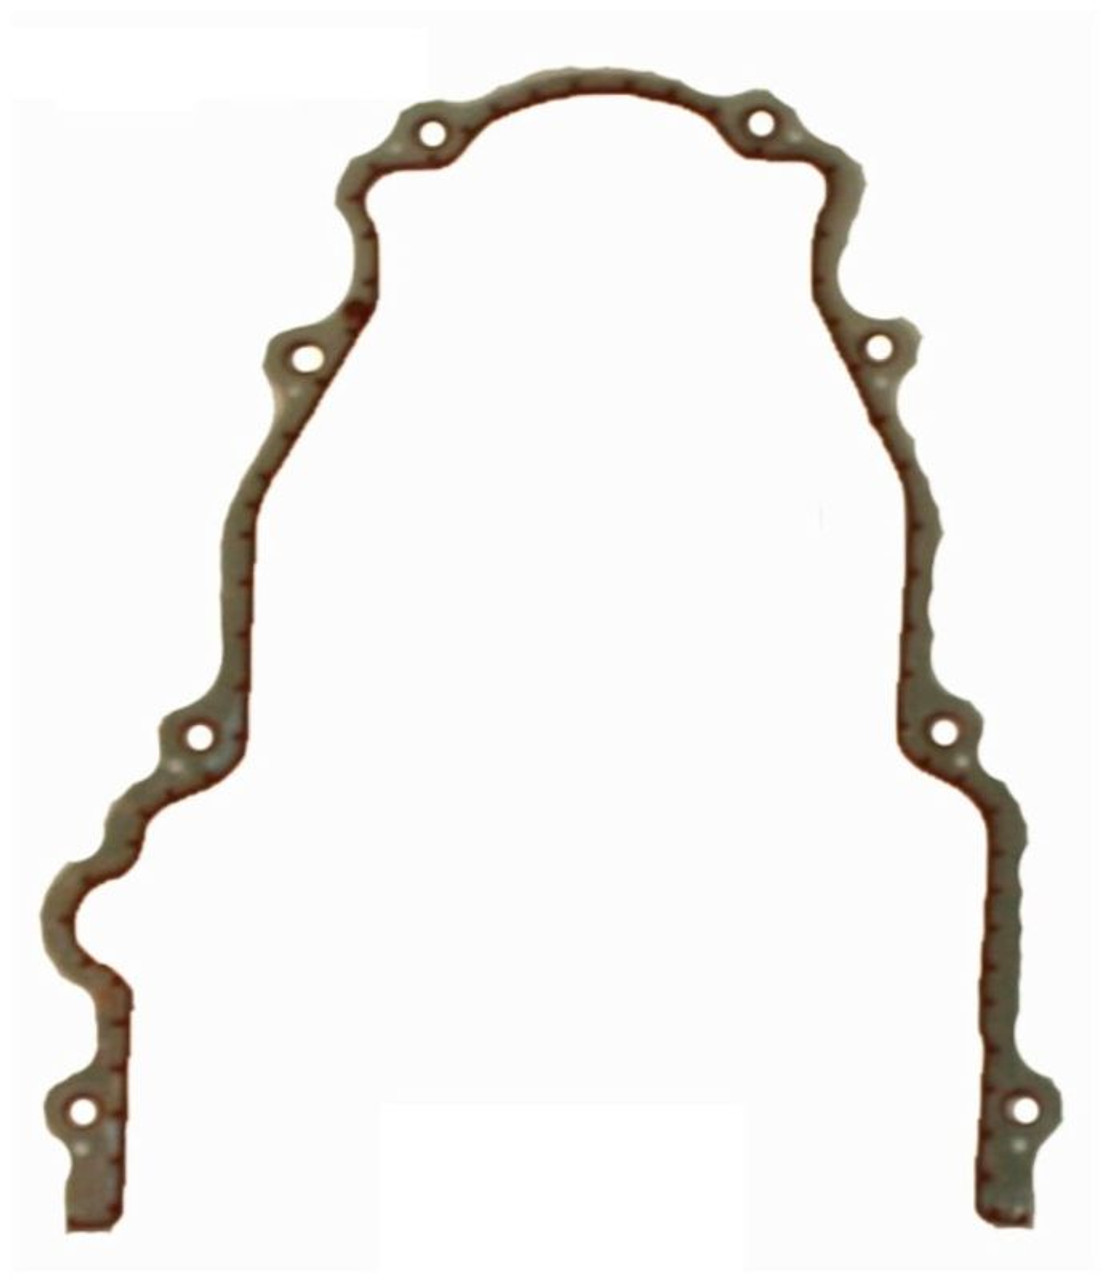 2004 Chevrolet Express 3500 6.0L Engine Timing Cover Gasket TCG293-A -188